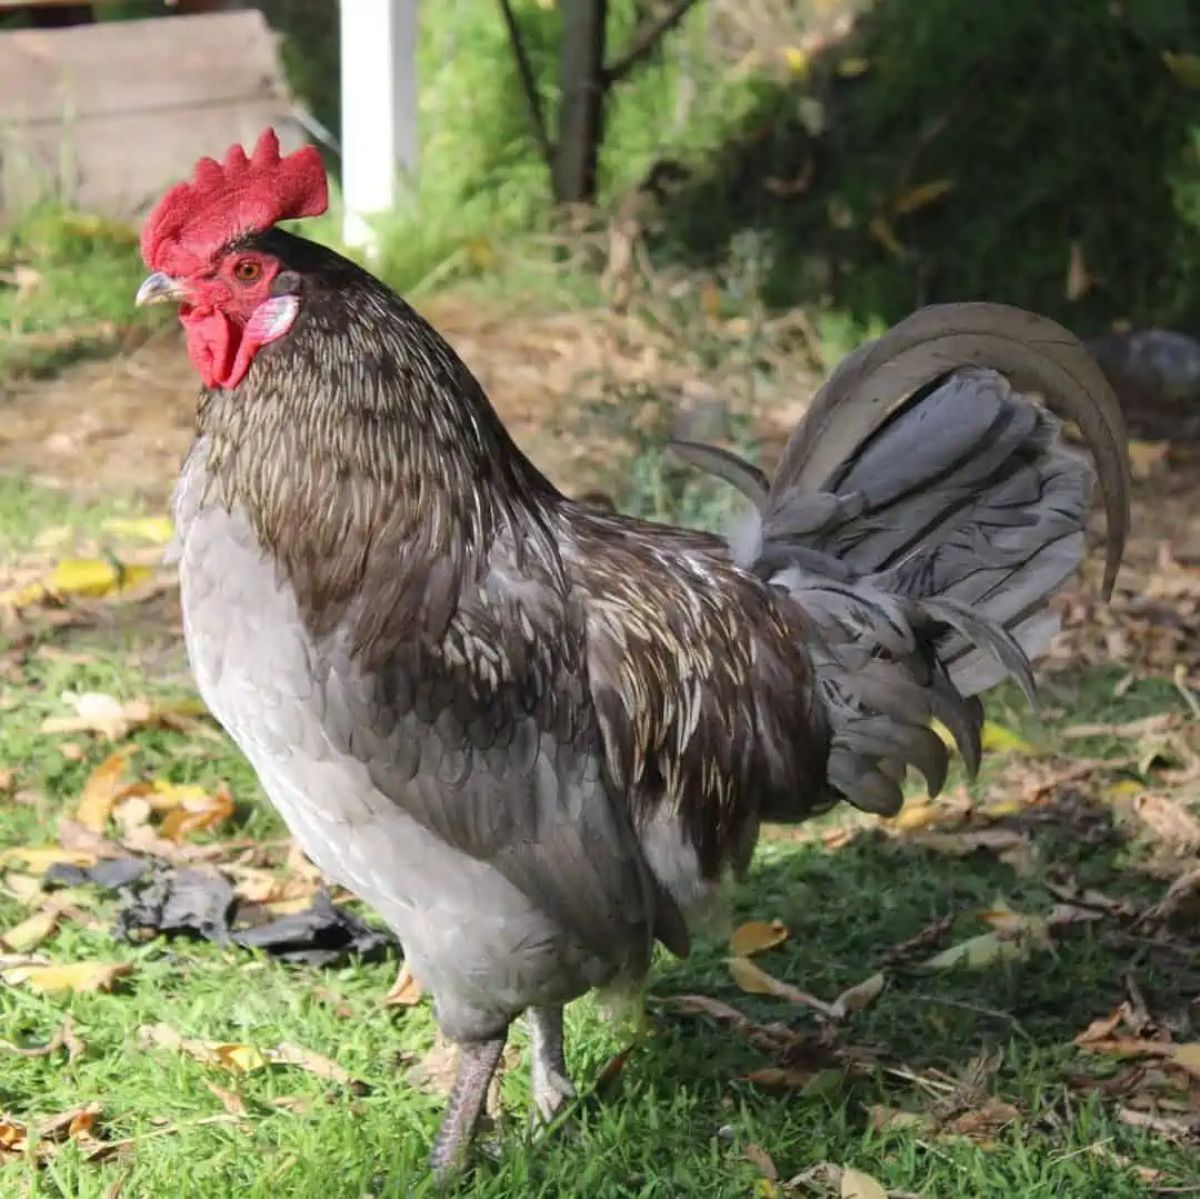 A big blue Isbar rooster in a backyard.